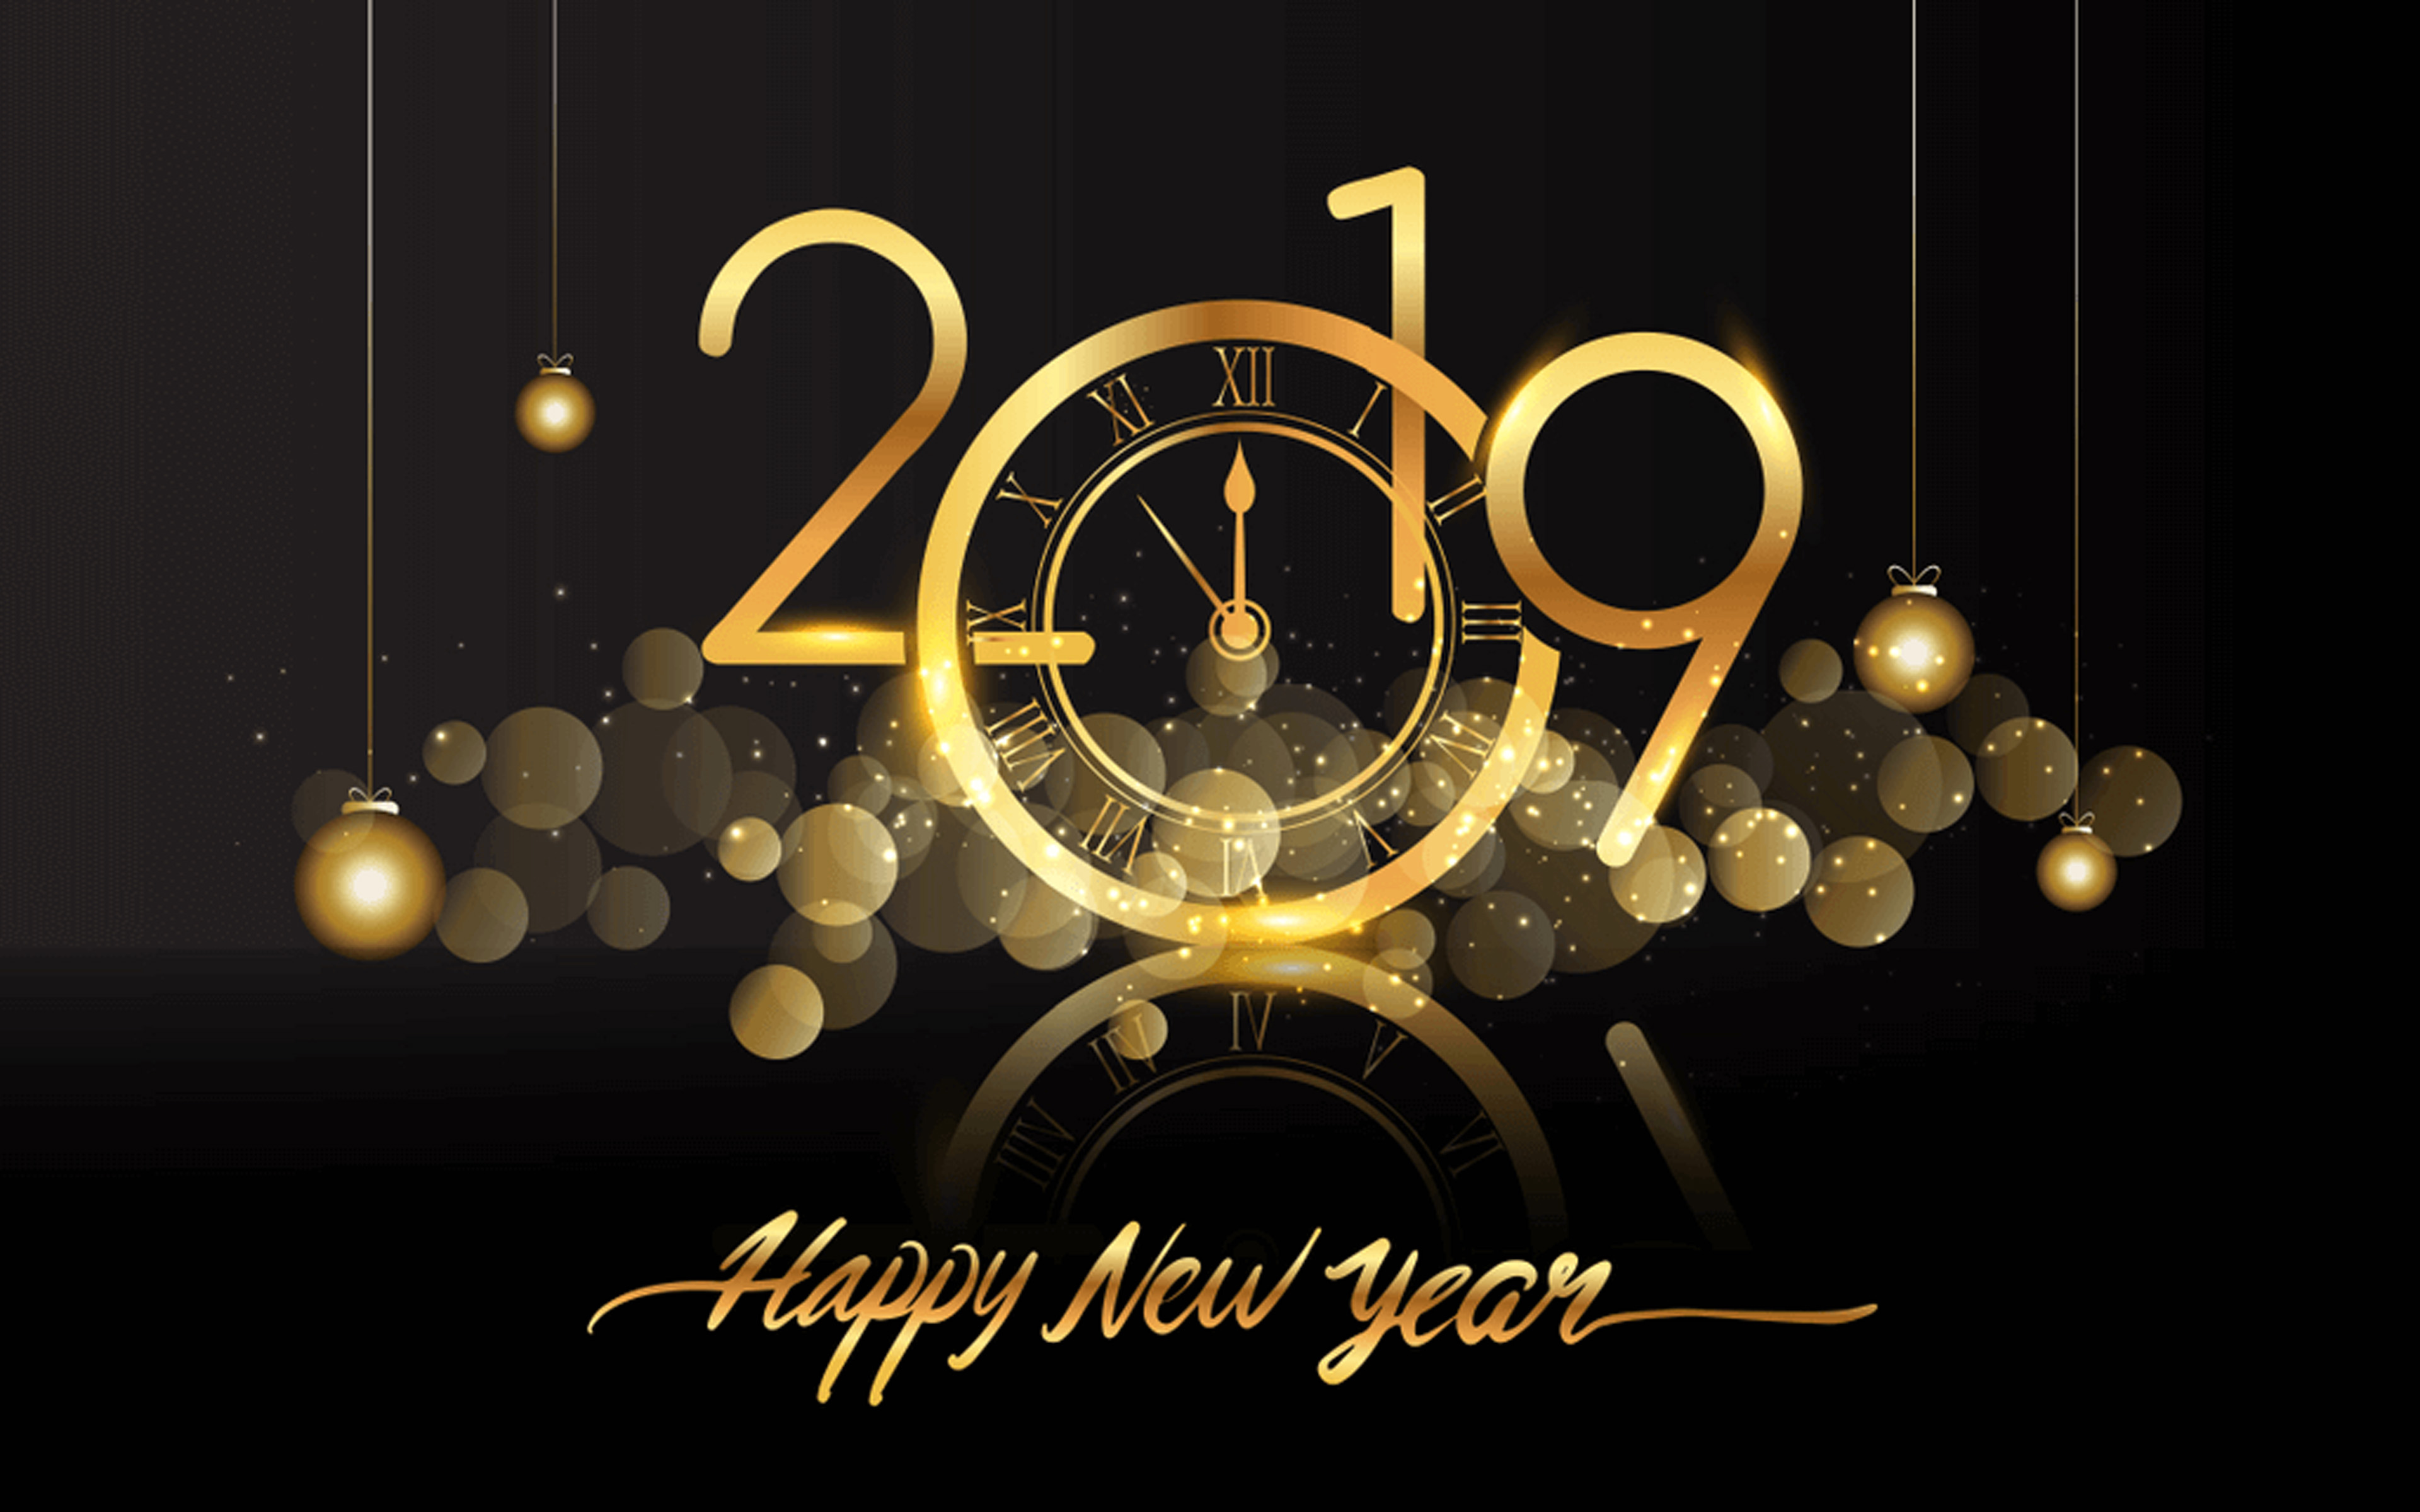 Happy New Year 2019 Clock Fireworks Hd Wallpapers 